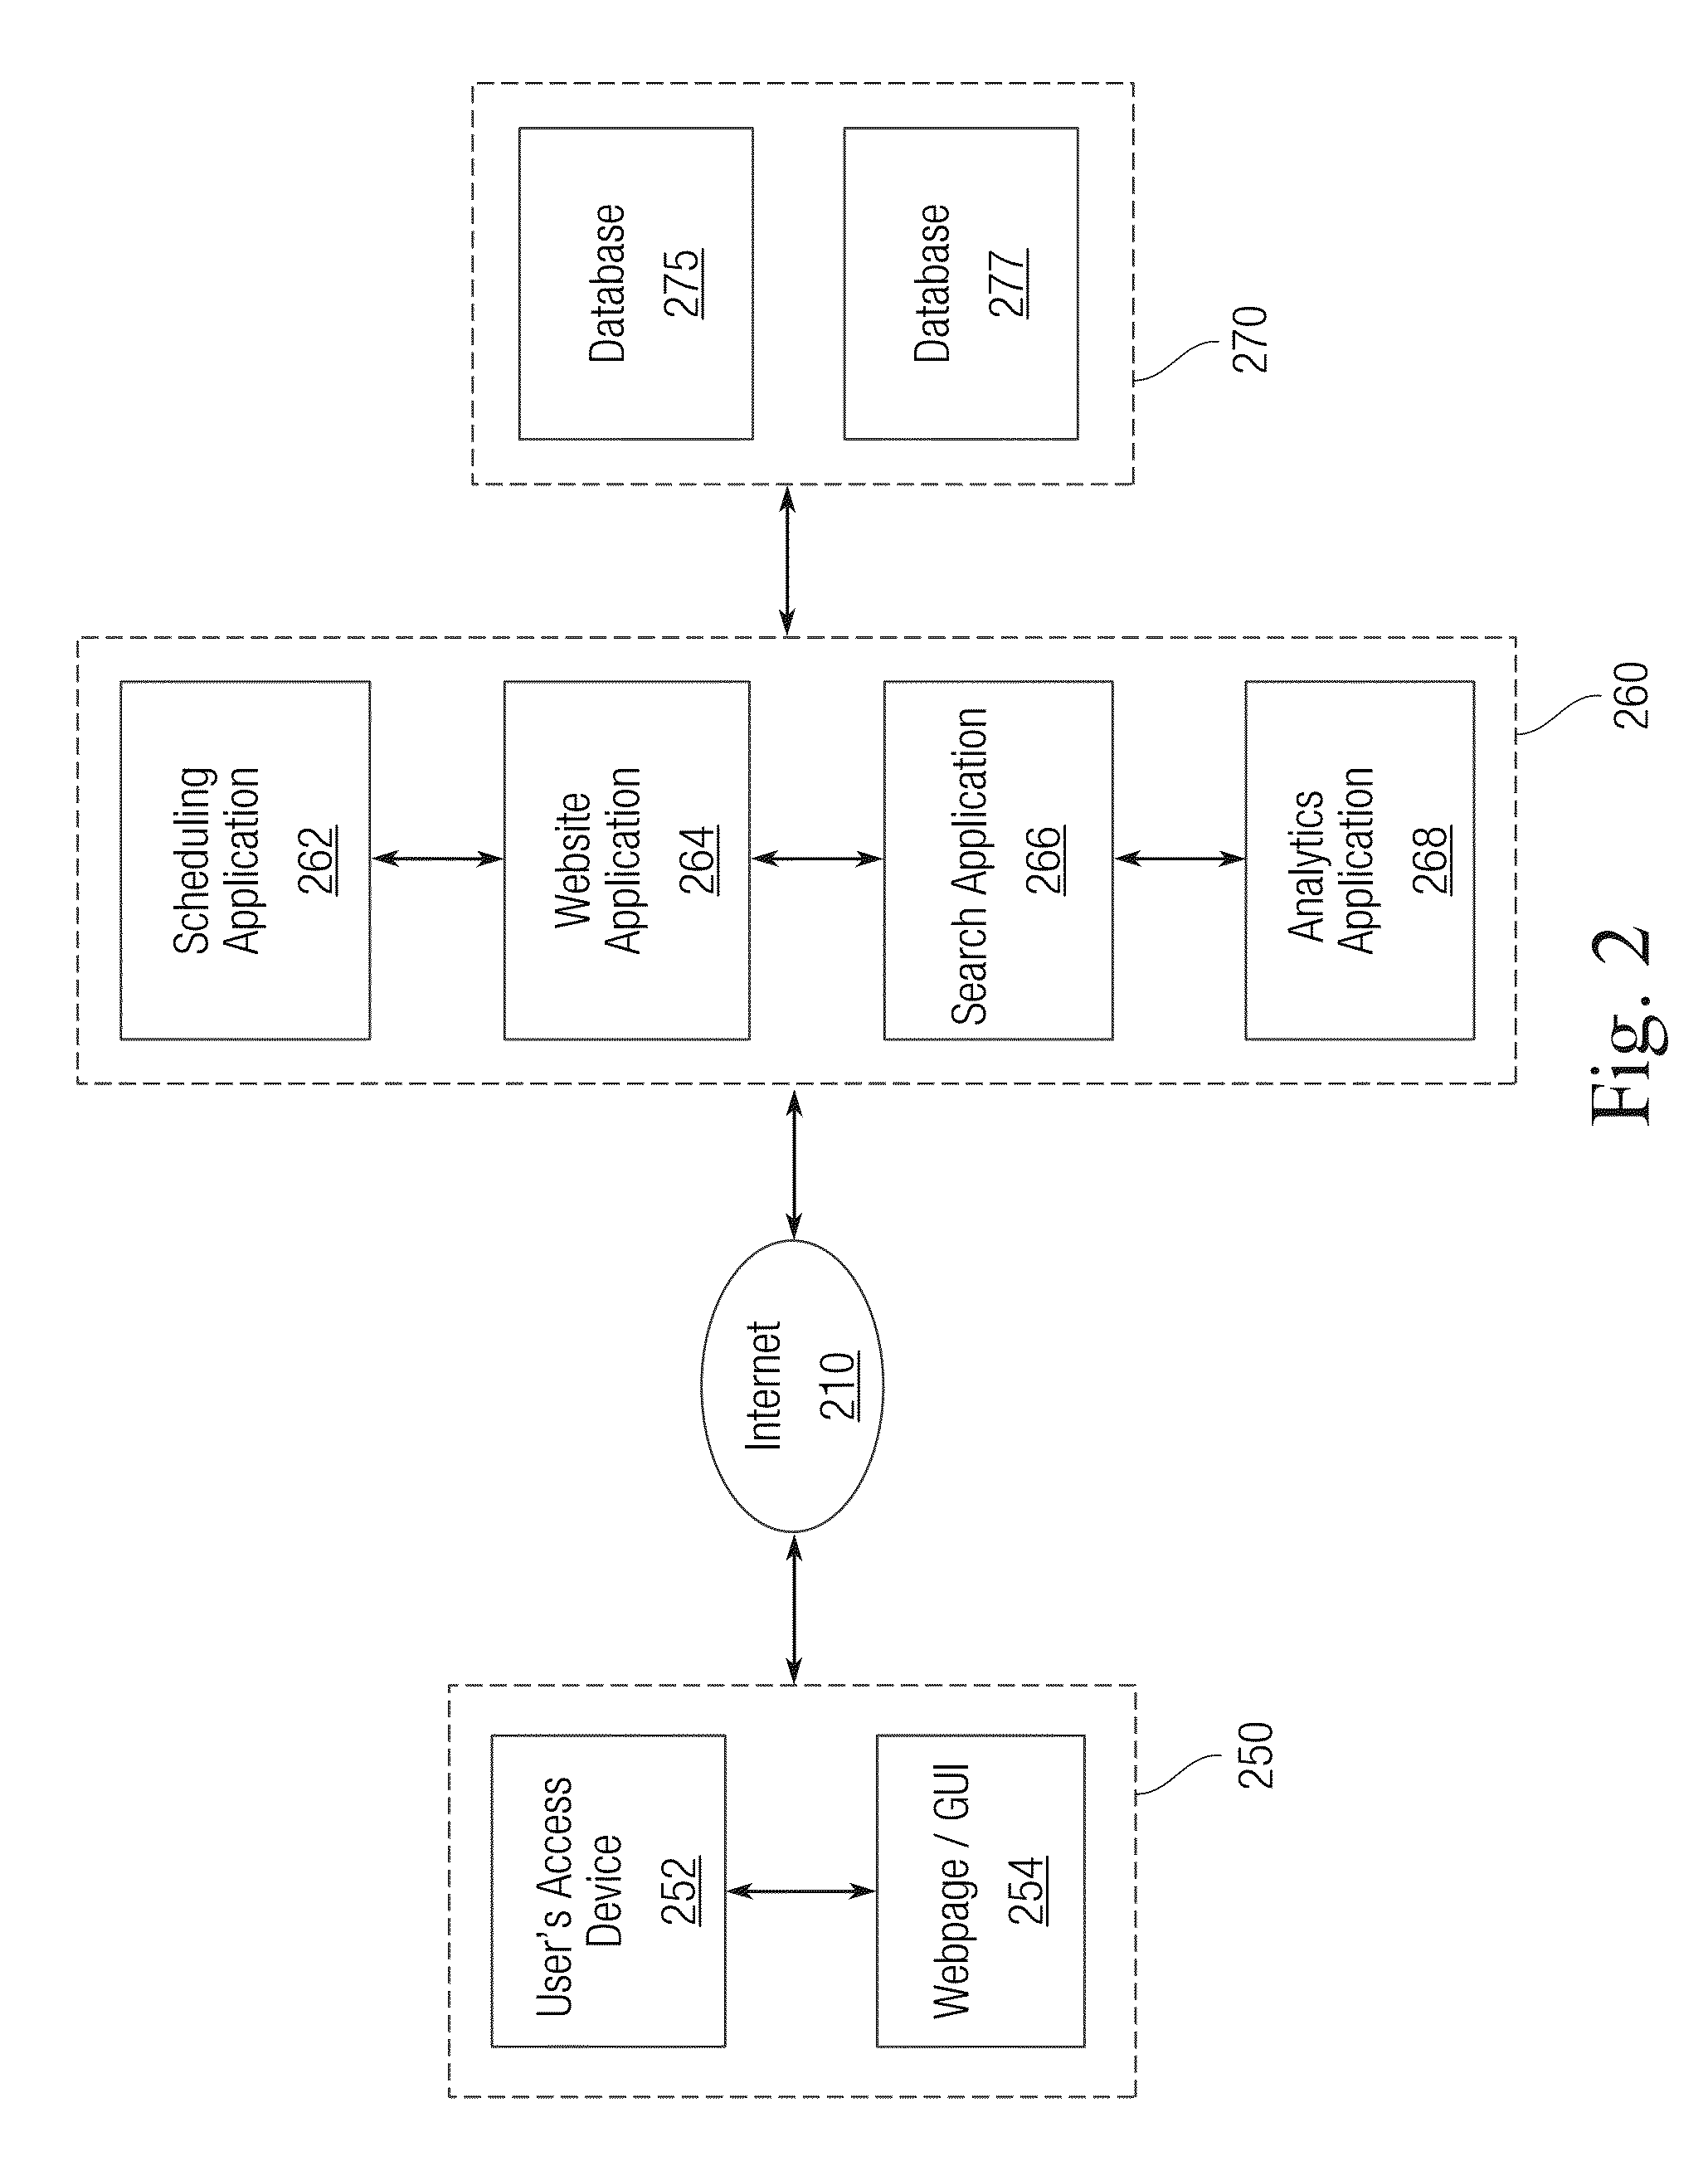 System and Methods for Managing Patients and Services